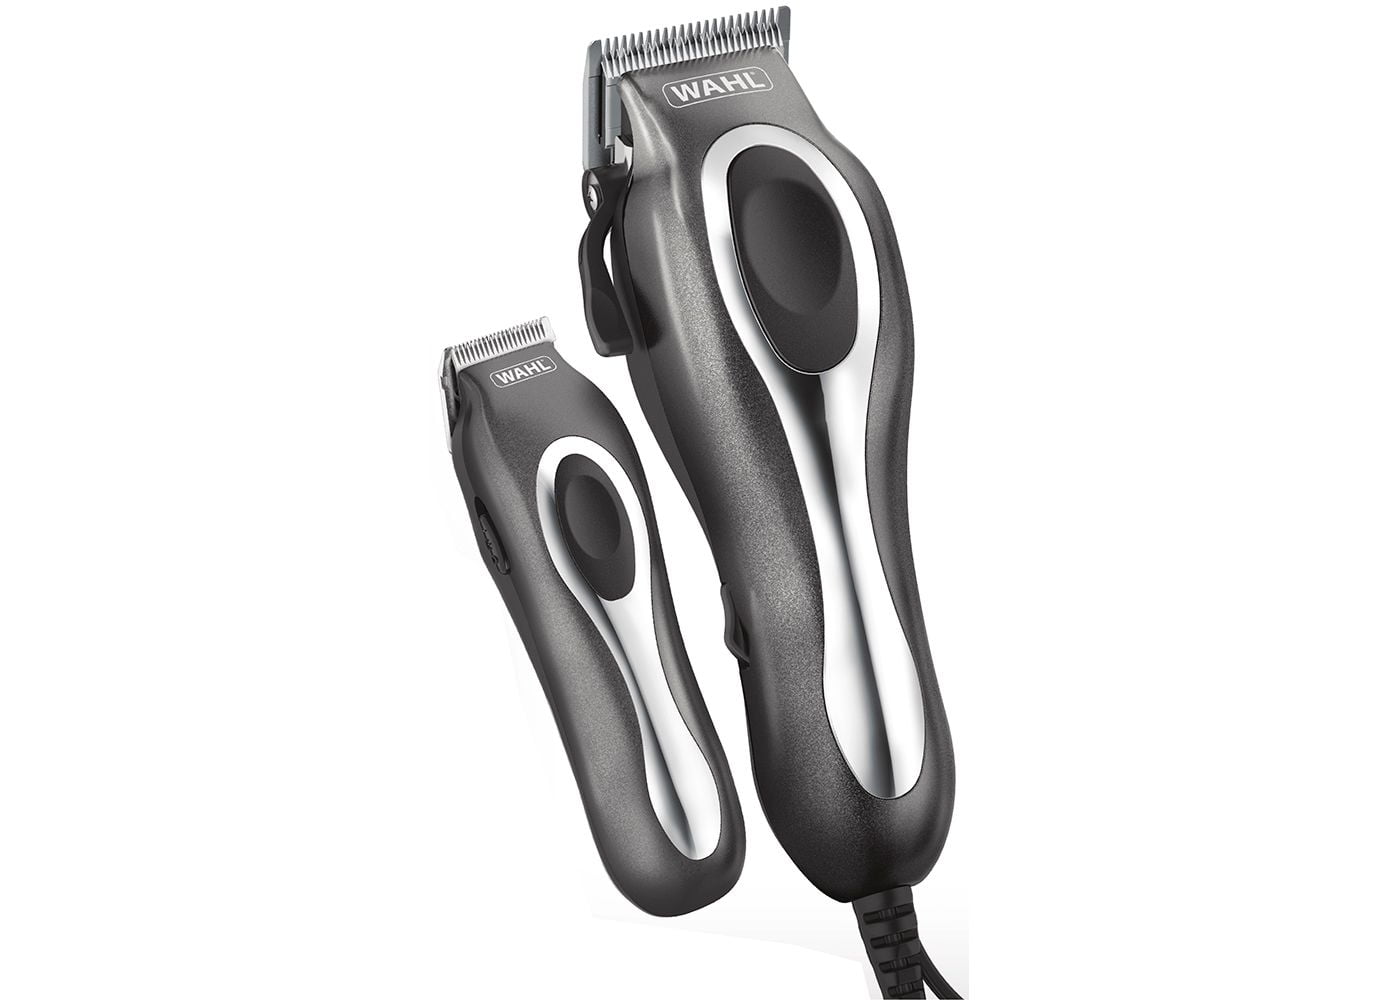 men's haircut with wahl clippers